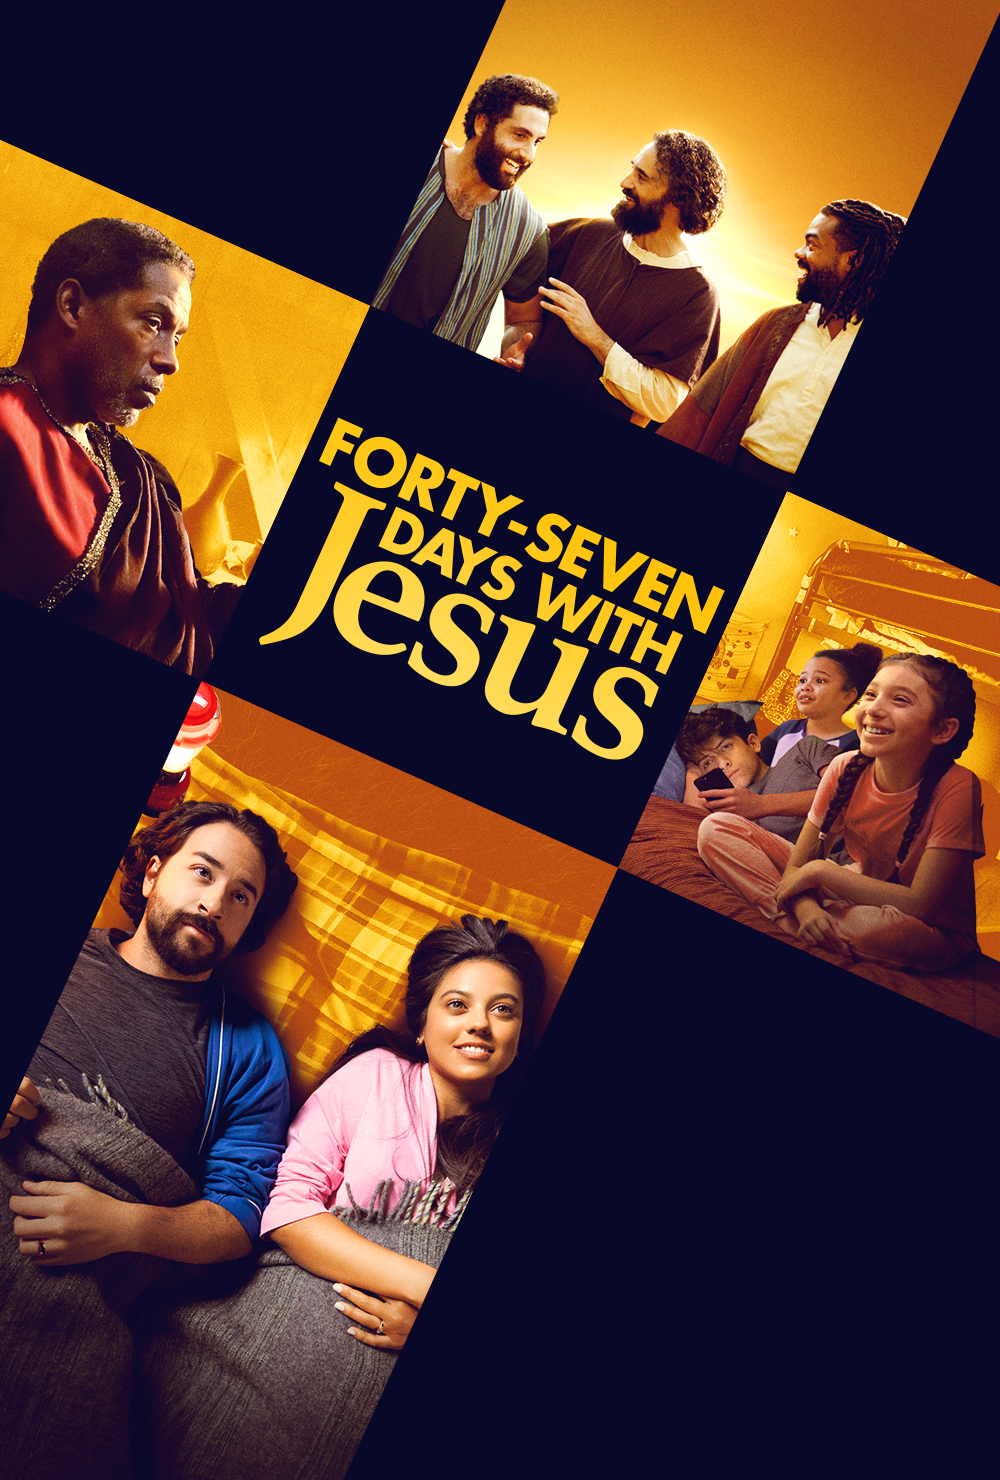 Fathom Events Sets March Release For ‘Forty-Seven Days With Jesus’